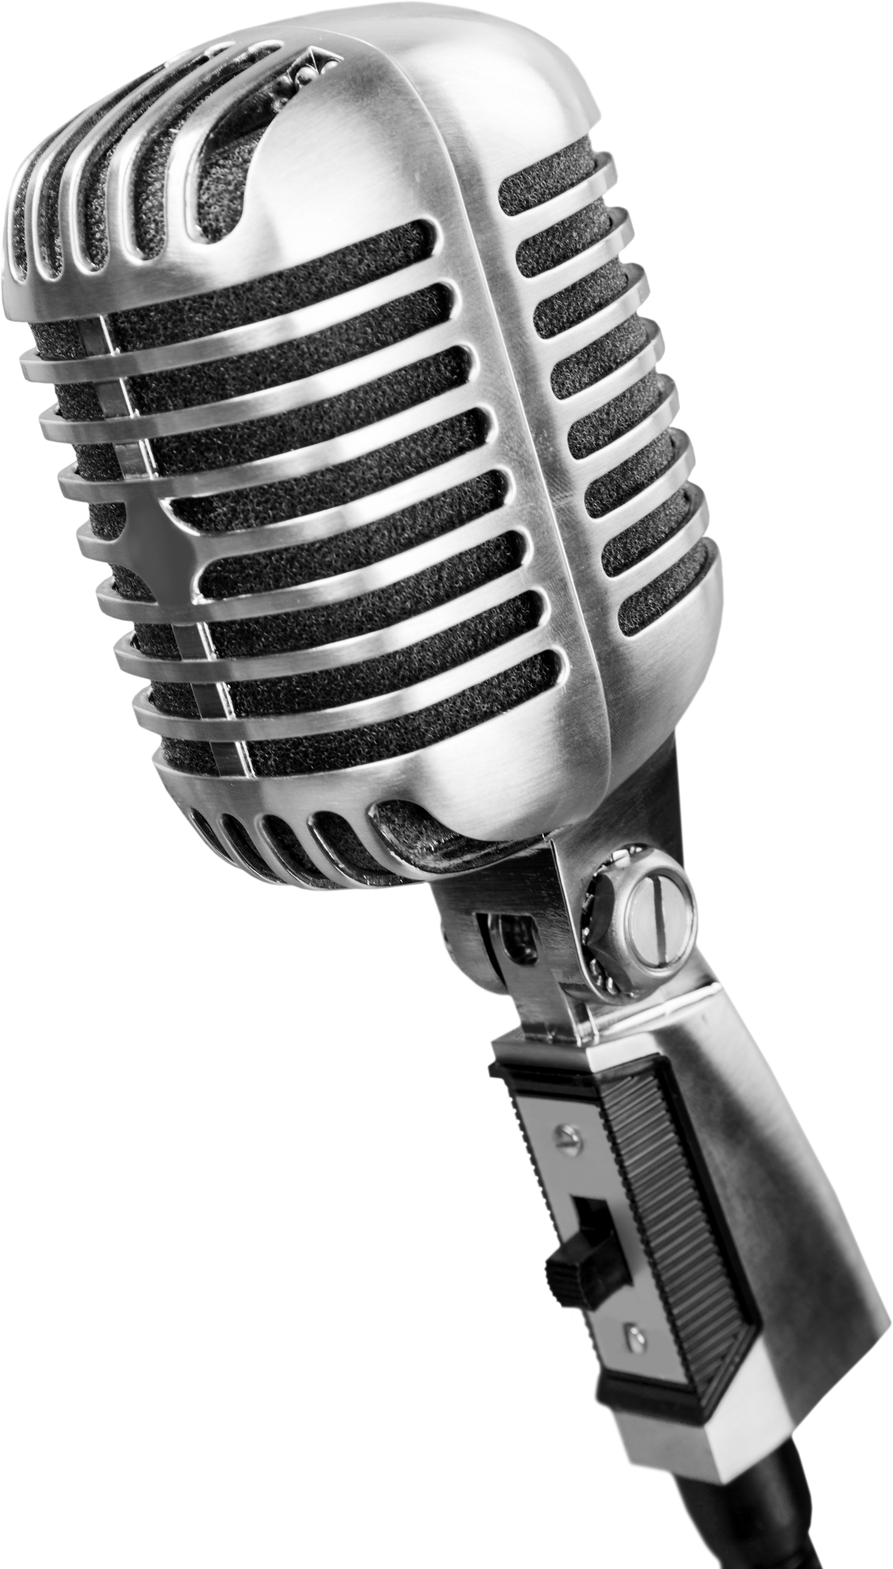 Transparent Image of a Microphone